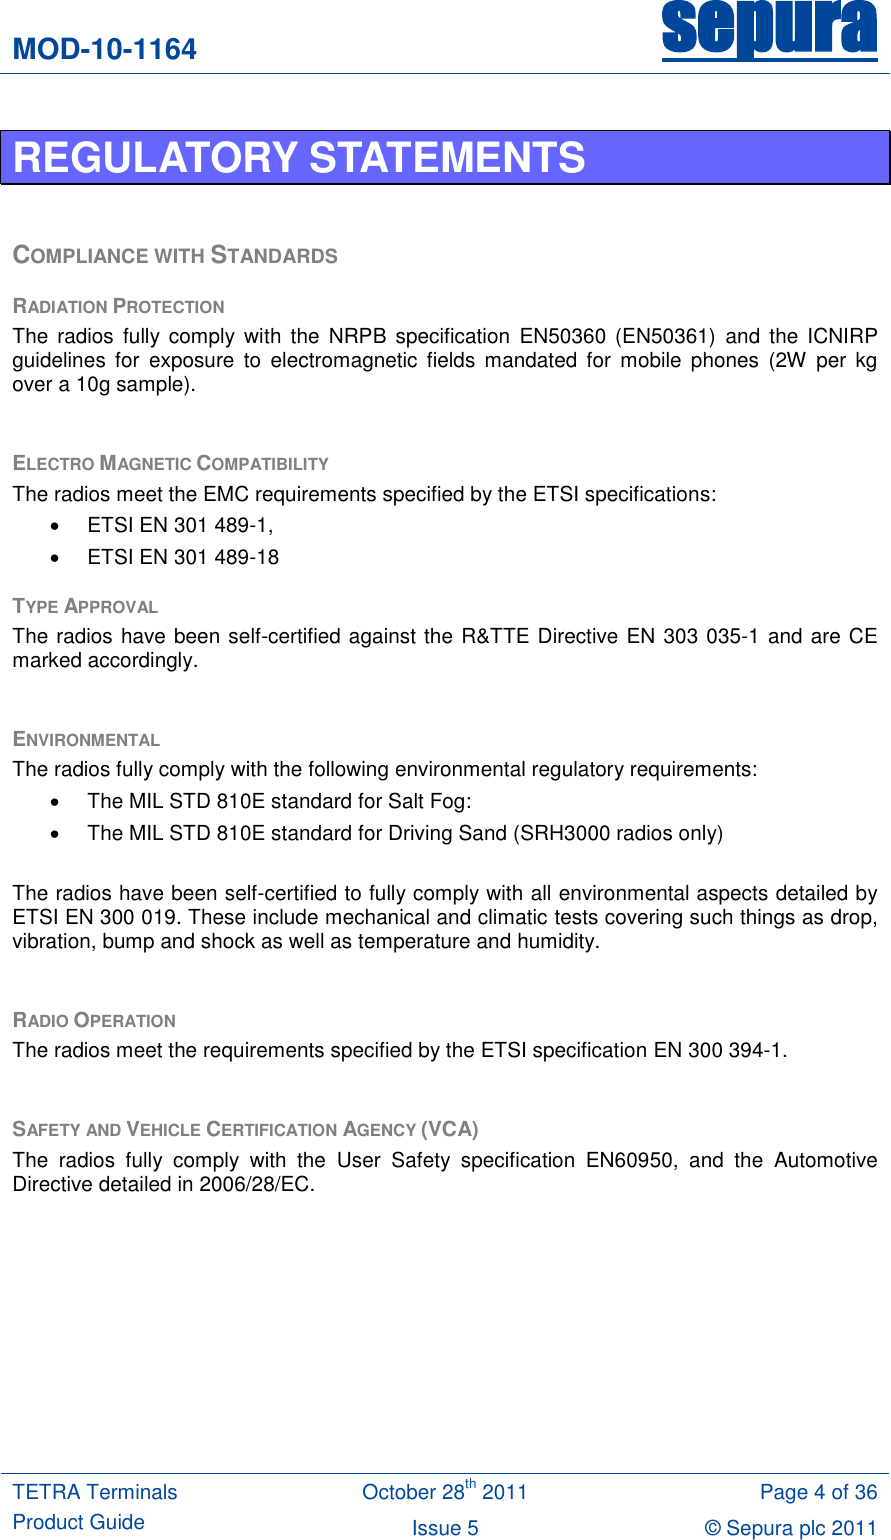 MOD-10-1164 sepura  TETRA Terminals Product Guide October 28th 2011 Page 4 of 36 Issue 5 © Sepura plc 2011   REGULATORY STATEMENTS  COMPLIANCE WITH STANDARDS RADIATION PROTECTION The  radios  fully comply  with  the  NRPB  specification  EN50360  (EN50361)  and  the  ICNIRP guidelines  for  exposure  to  electromagnetic fields  mandated  for  mobile  phones  (2W  per  kg over a 10g sample).  ELECTRO MAGNETIC COMPATIBILITY The radios meet the EMC requirements specified by the ETSI specifications:   ETSI EN 301 489-1,   ETSI EN 301 489-18 TYPE APPROVAL The radios have been self-certified against the R&amp;TTE Directive EN 303 035-1 and are CE marked accordingly.  ENVIRONMENTAL The radios fully comply with the following environmental regulatory requirements:   The MIL STD 810E standard for Salt Fog:   The MIL STD 810E standard for Driving Sand (SRH3000 radios only)  The radios have been self-certified to fully comply with all environmental aspects detailed by ETSI EN 300 019. These include mechanical and climatic tests covering such things as drop, vibration, bump and shock as well as temperature and humidity.  RADIO OPERATION The radios meet the requirements specified by the ETSI specification EN 300 394-1.   SAFETY AND VEHICLE CERTIFICATION AGENCY (VCA) The  radios  fully  comply  with  the  User  Safety  specification  EN60950,  and  the  Automotive Directive detailed in 2006/28/EC.  